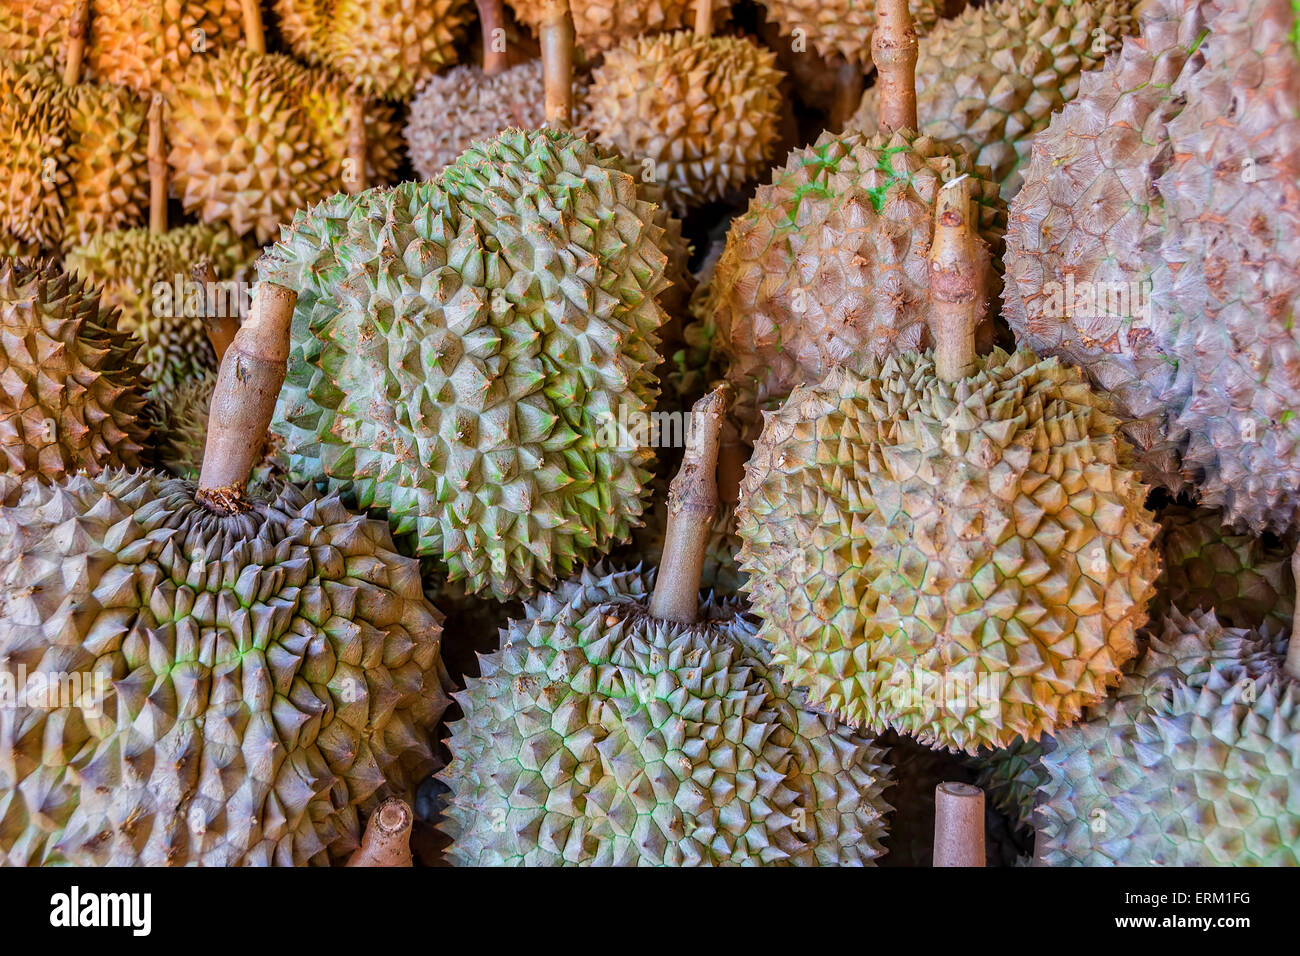 Spiky and smelly Philippines Durian for sale in a local market Stock Photo